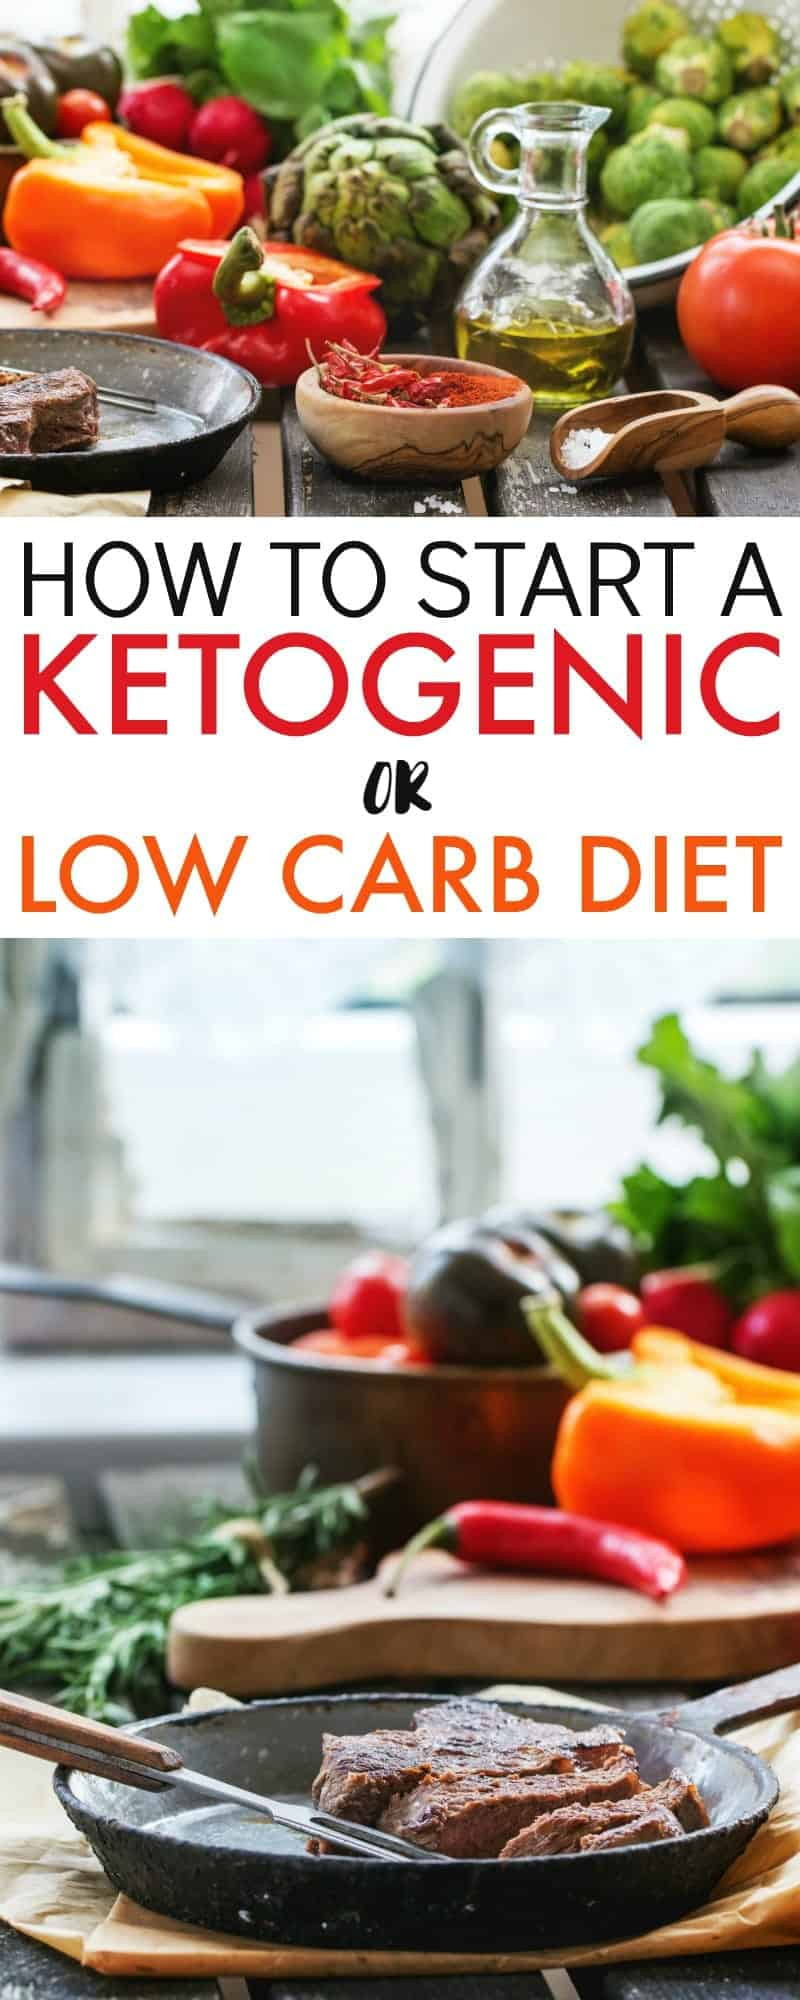 How To Start A Keto Diet Plan
 How to Start a Ketogenic Diet Simplified 730 Sage Street